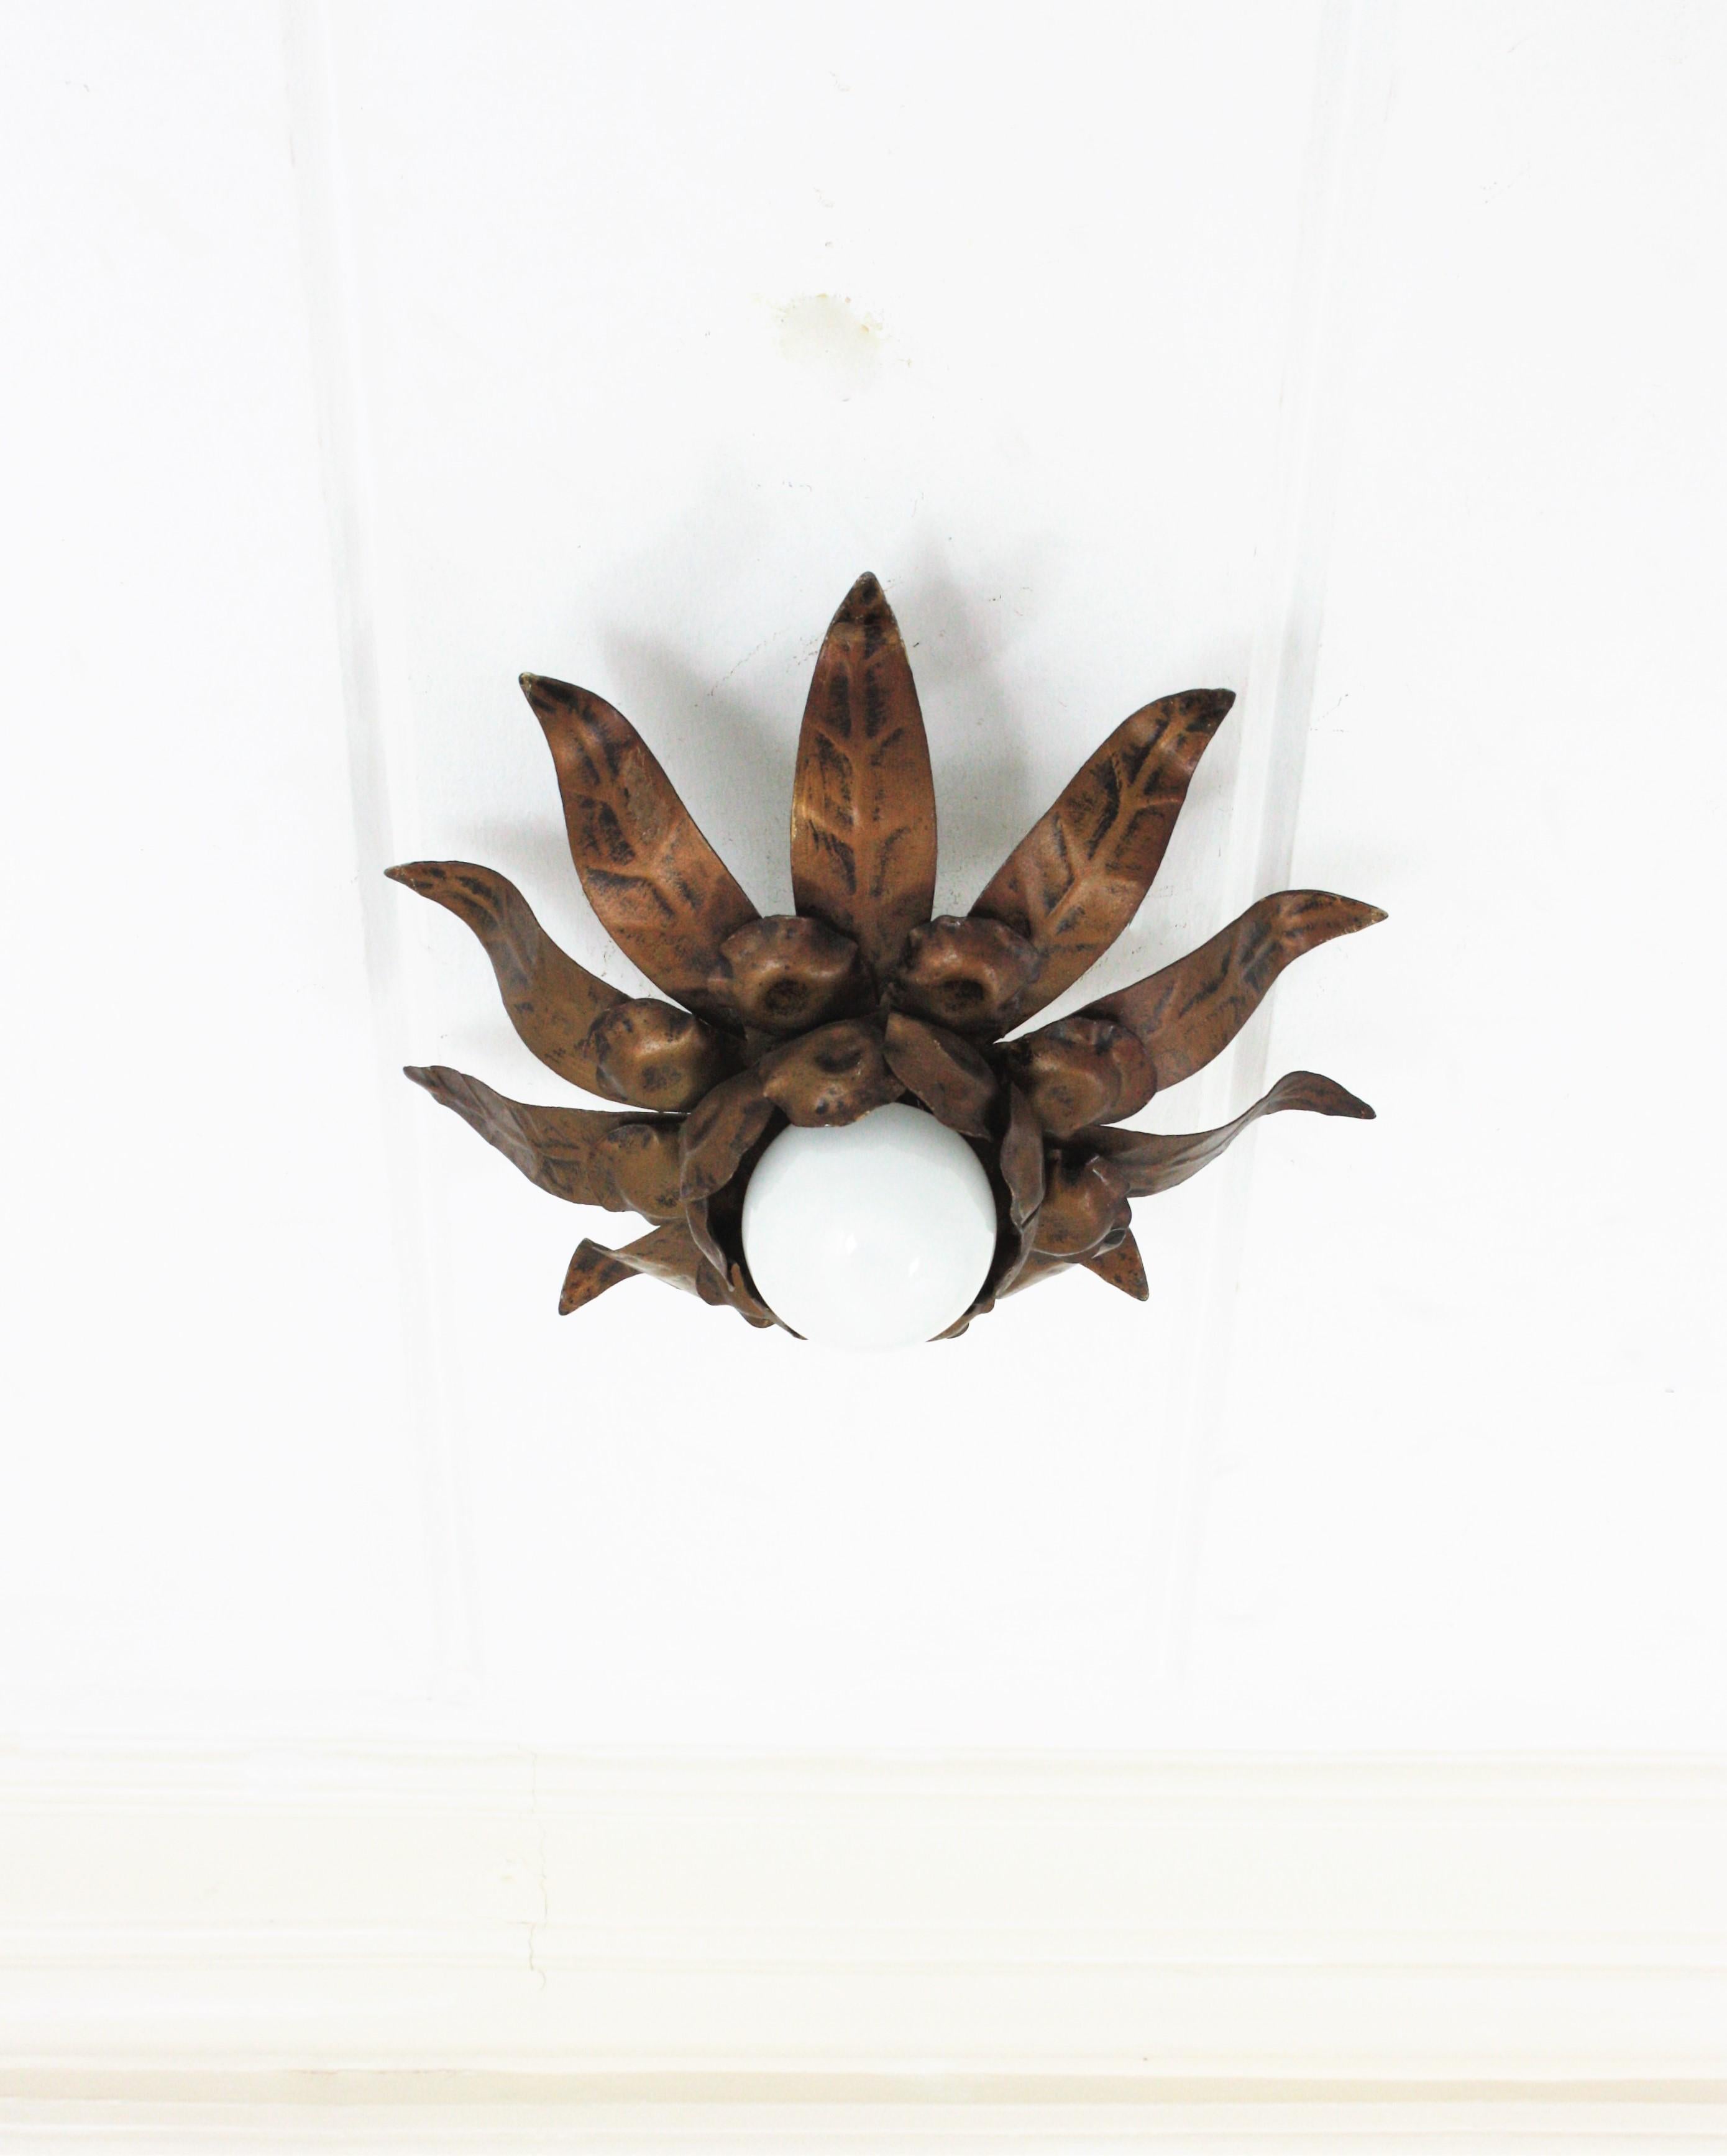 Flower Sunburst Flush Mount, Gilt Iron. Spain, 1960s.
This ceiling light features a flower shaped frame with three layers of leaves in different sizes surrounding a central exposed bulb. Patinated in bronze gilt color.
This sunburst light fixture